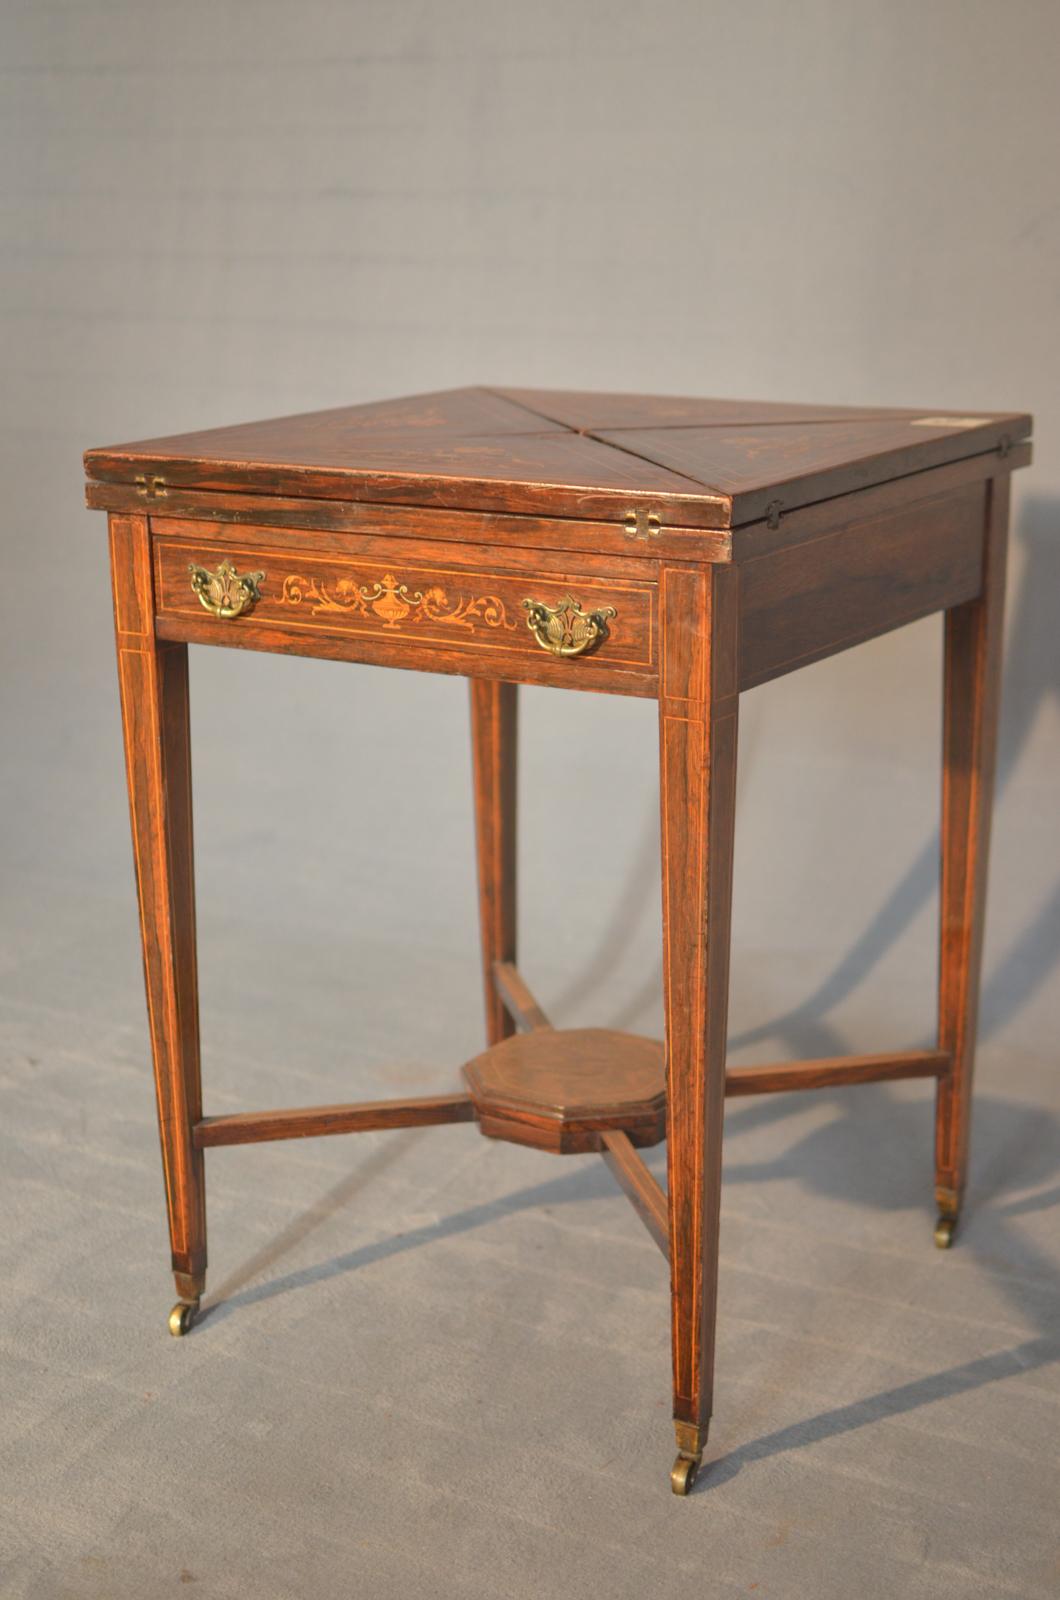 Victorian handkerchief in English rosewood inlaid in the mid-19th century. The table opens by raising the four segments each of which has a glass support. It has a lower drawer. There are wheels for each foot, it is in good condition with some trace